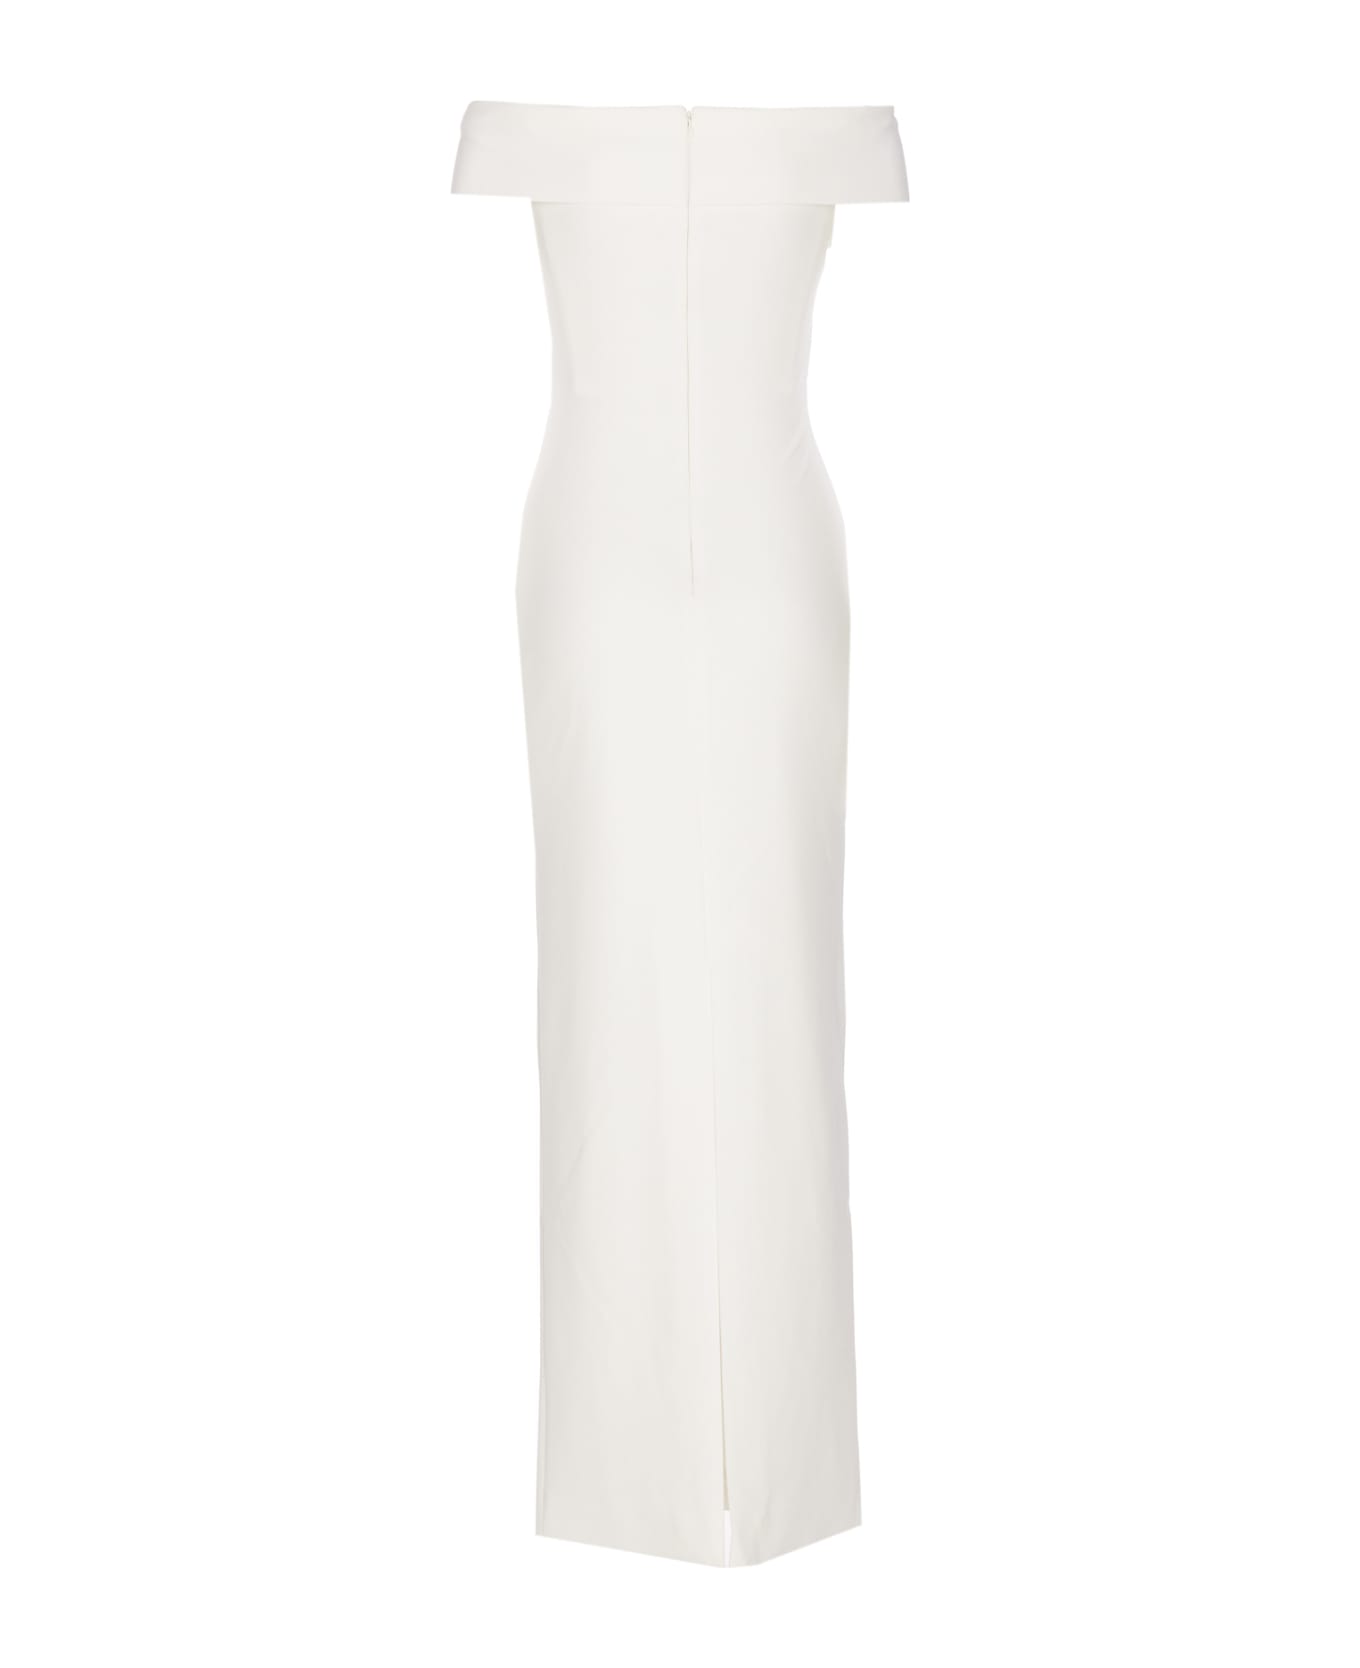 Solace London Ines Maxi Dress - White